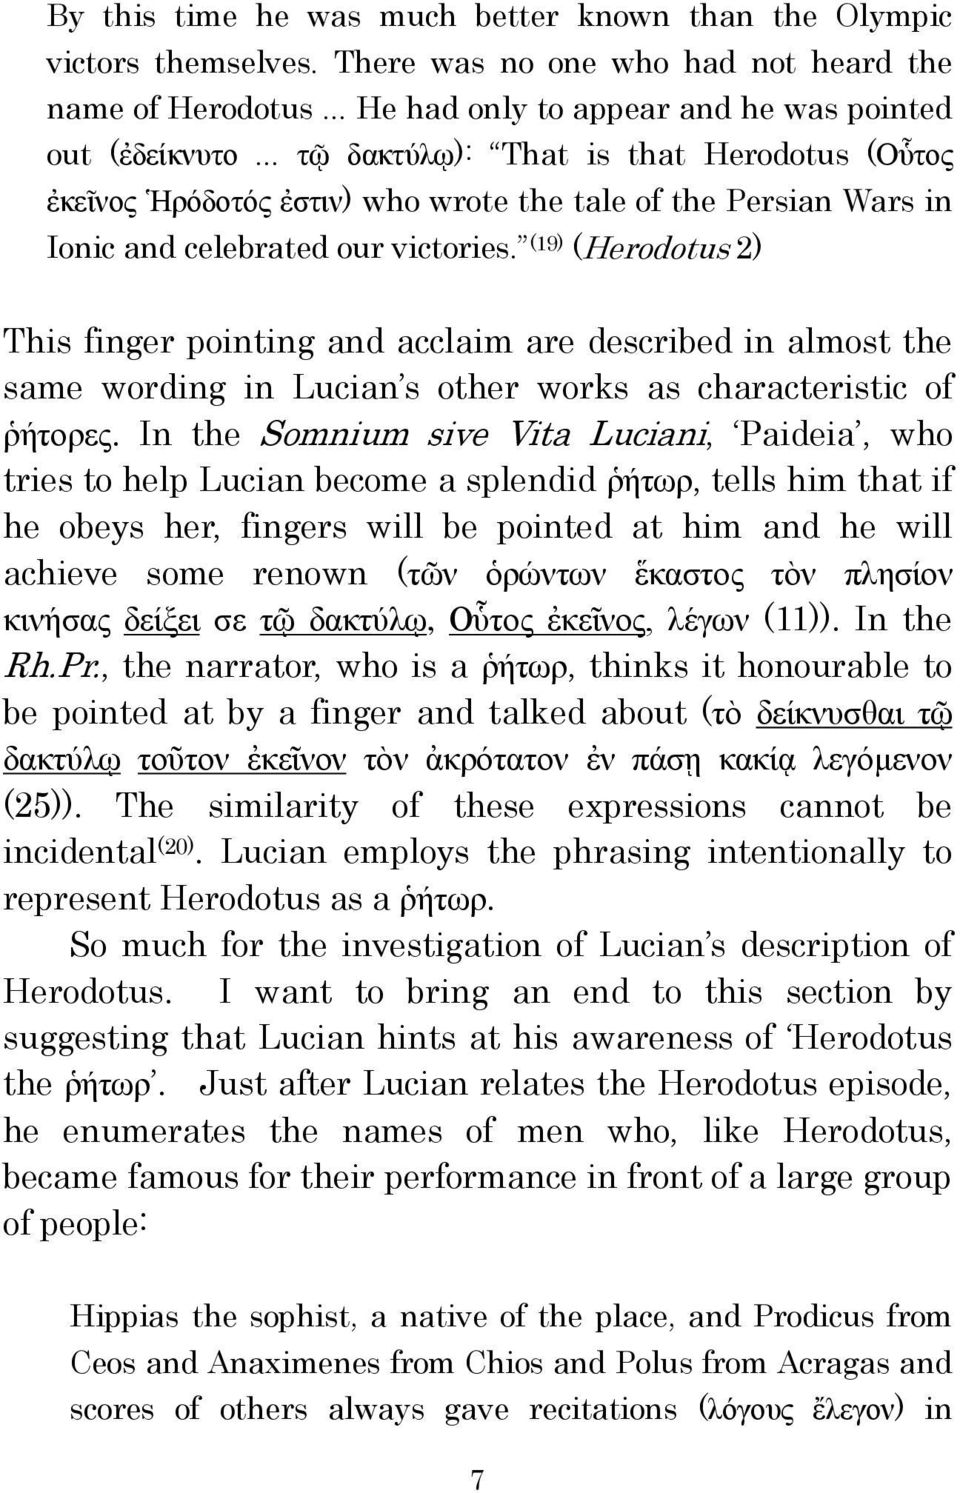 (19) (Herodotus 2) This finger pointing and acclaim are described in almost the same wording in Lucian s other works as characteristic of ῥήτορες.